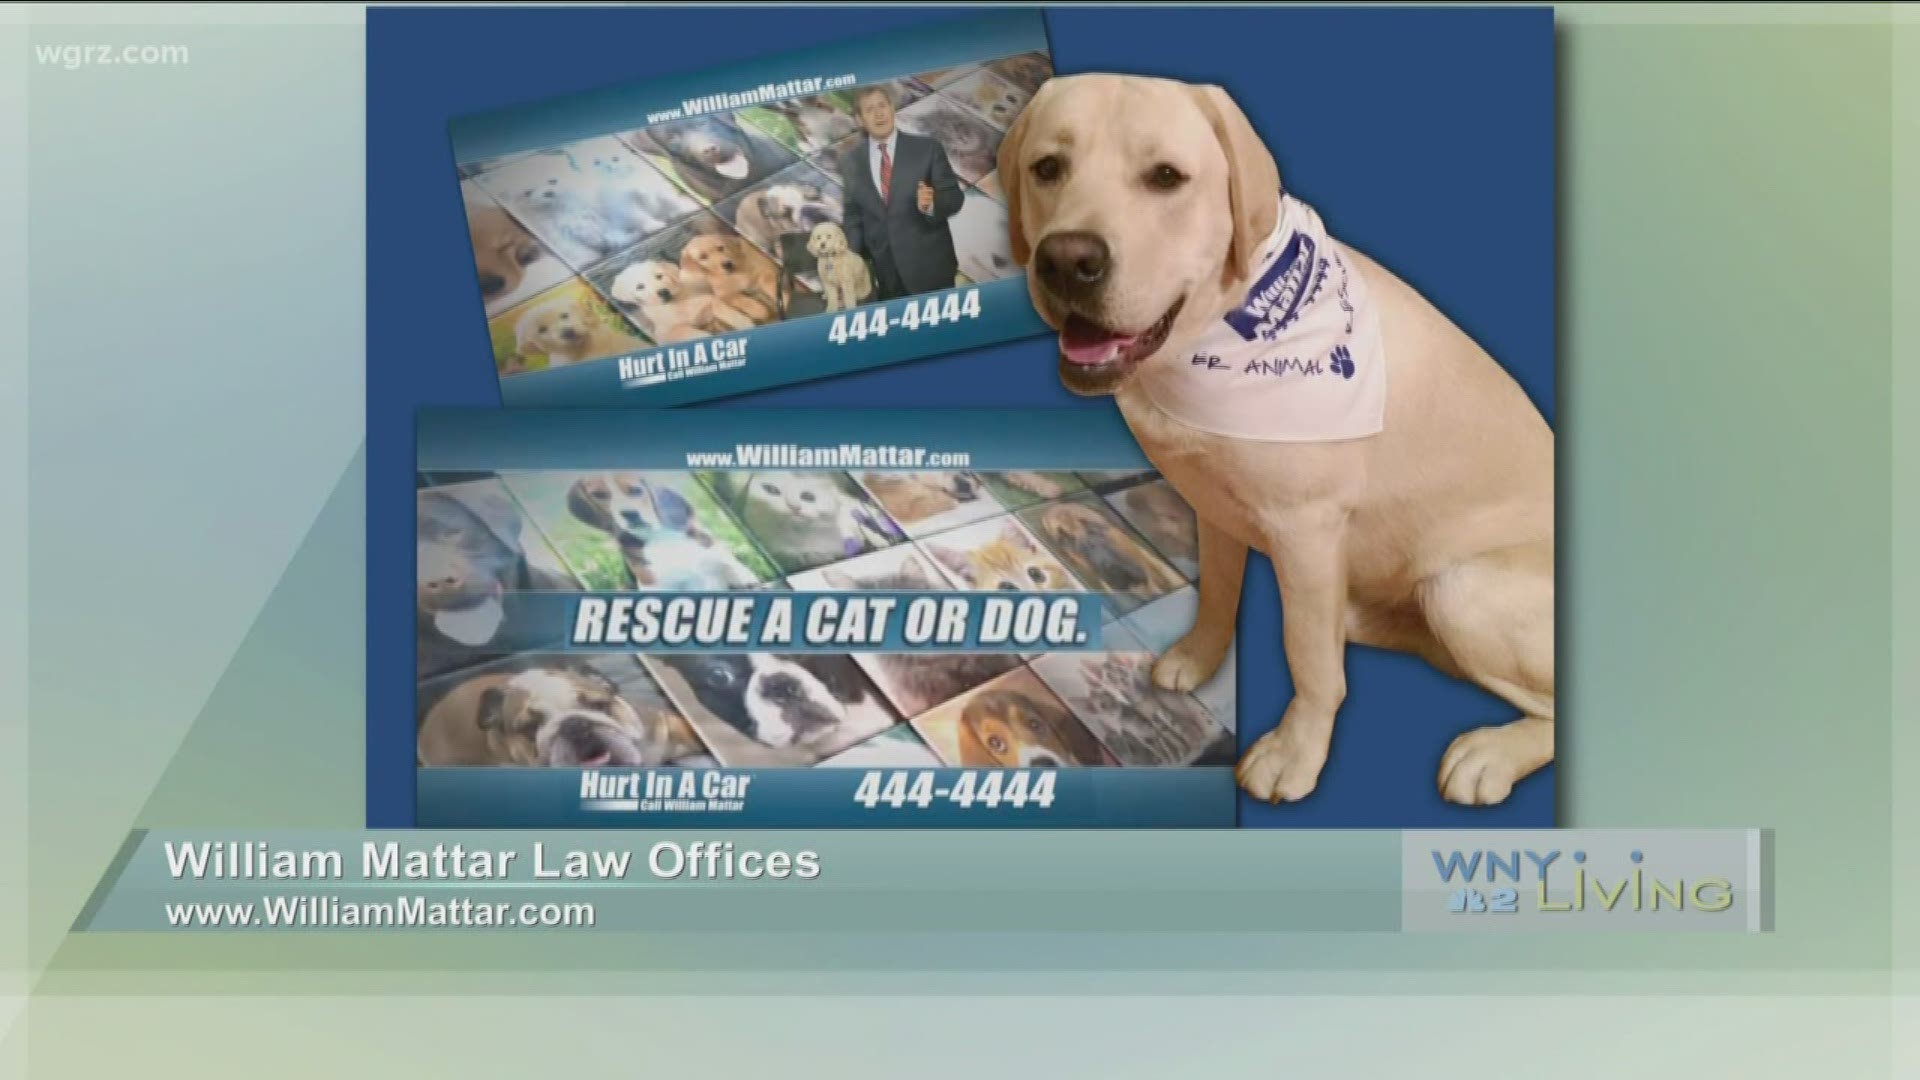 November 23 - William Mattar Law Offices (THIS VIDEO IS SPONSORED BY WILLIAM MATTAR LAW OFFICES)